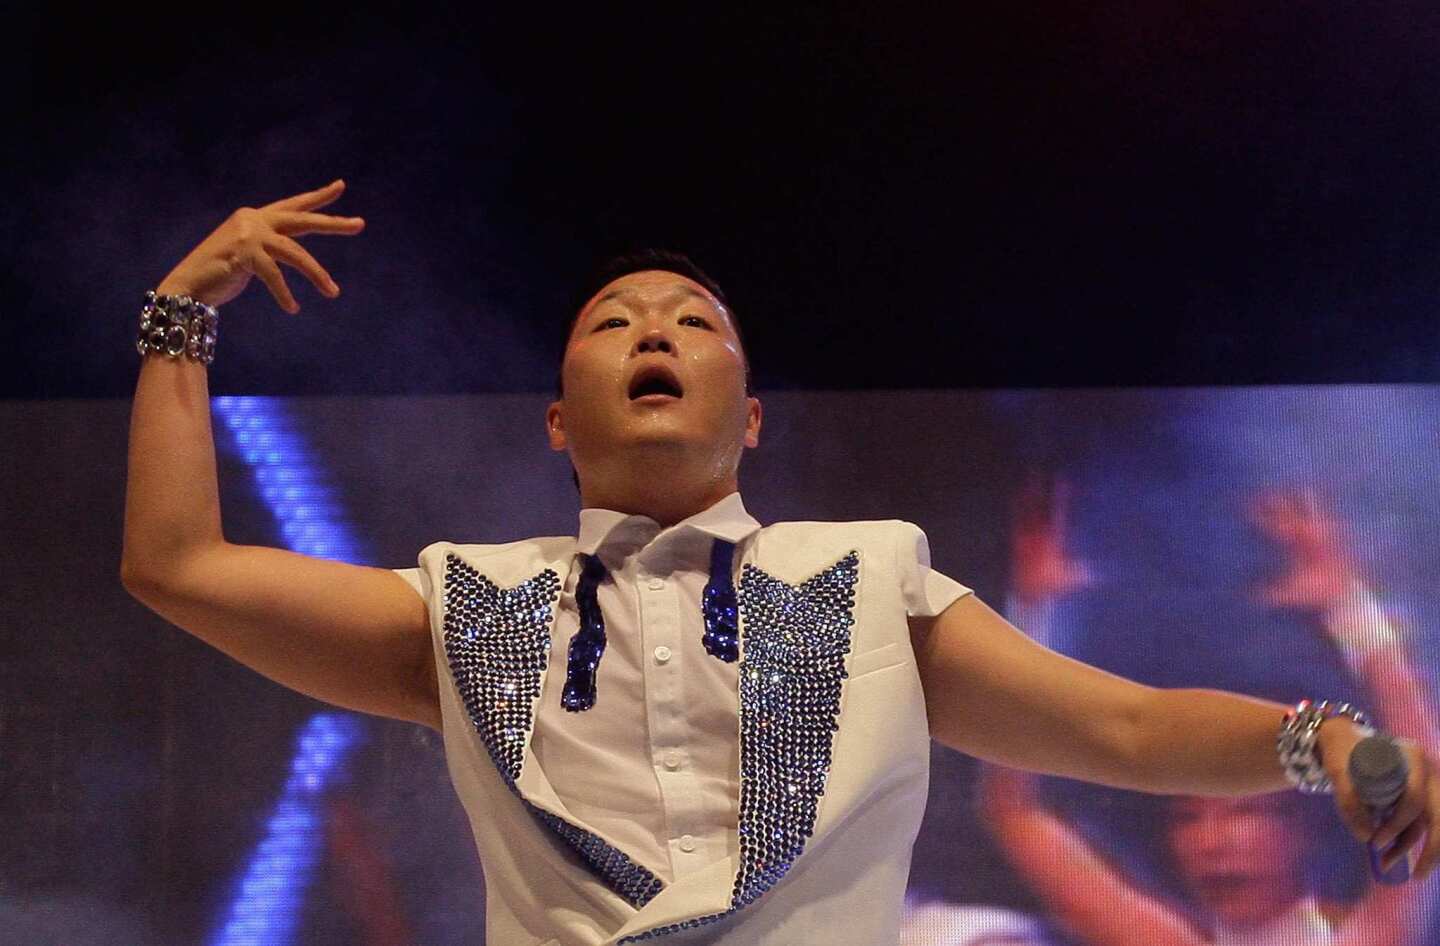 OVERRATED: The 'sensation' that is Psy